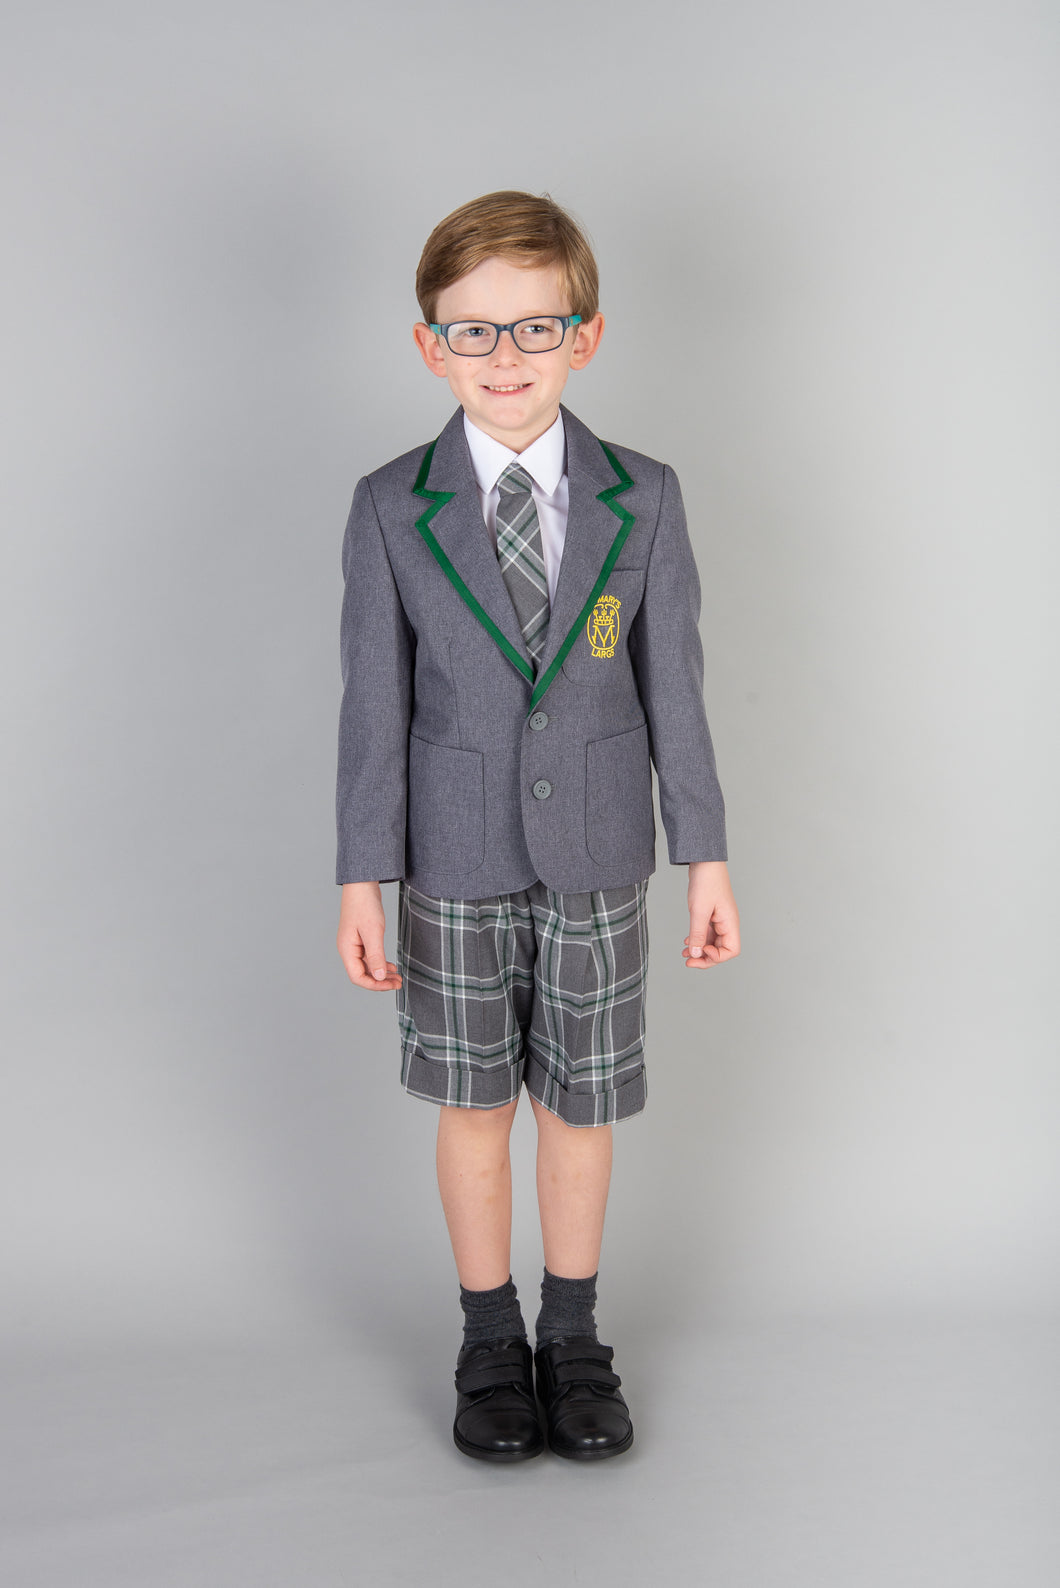 St Marys Eco Blazer for boys, only at Kinderland Largs and available for hire, save money shop local